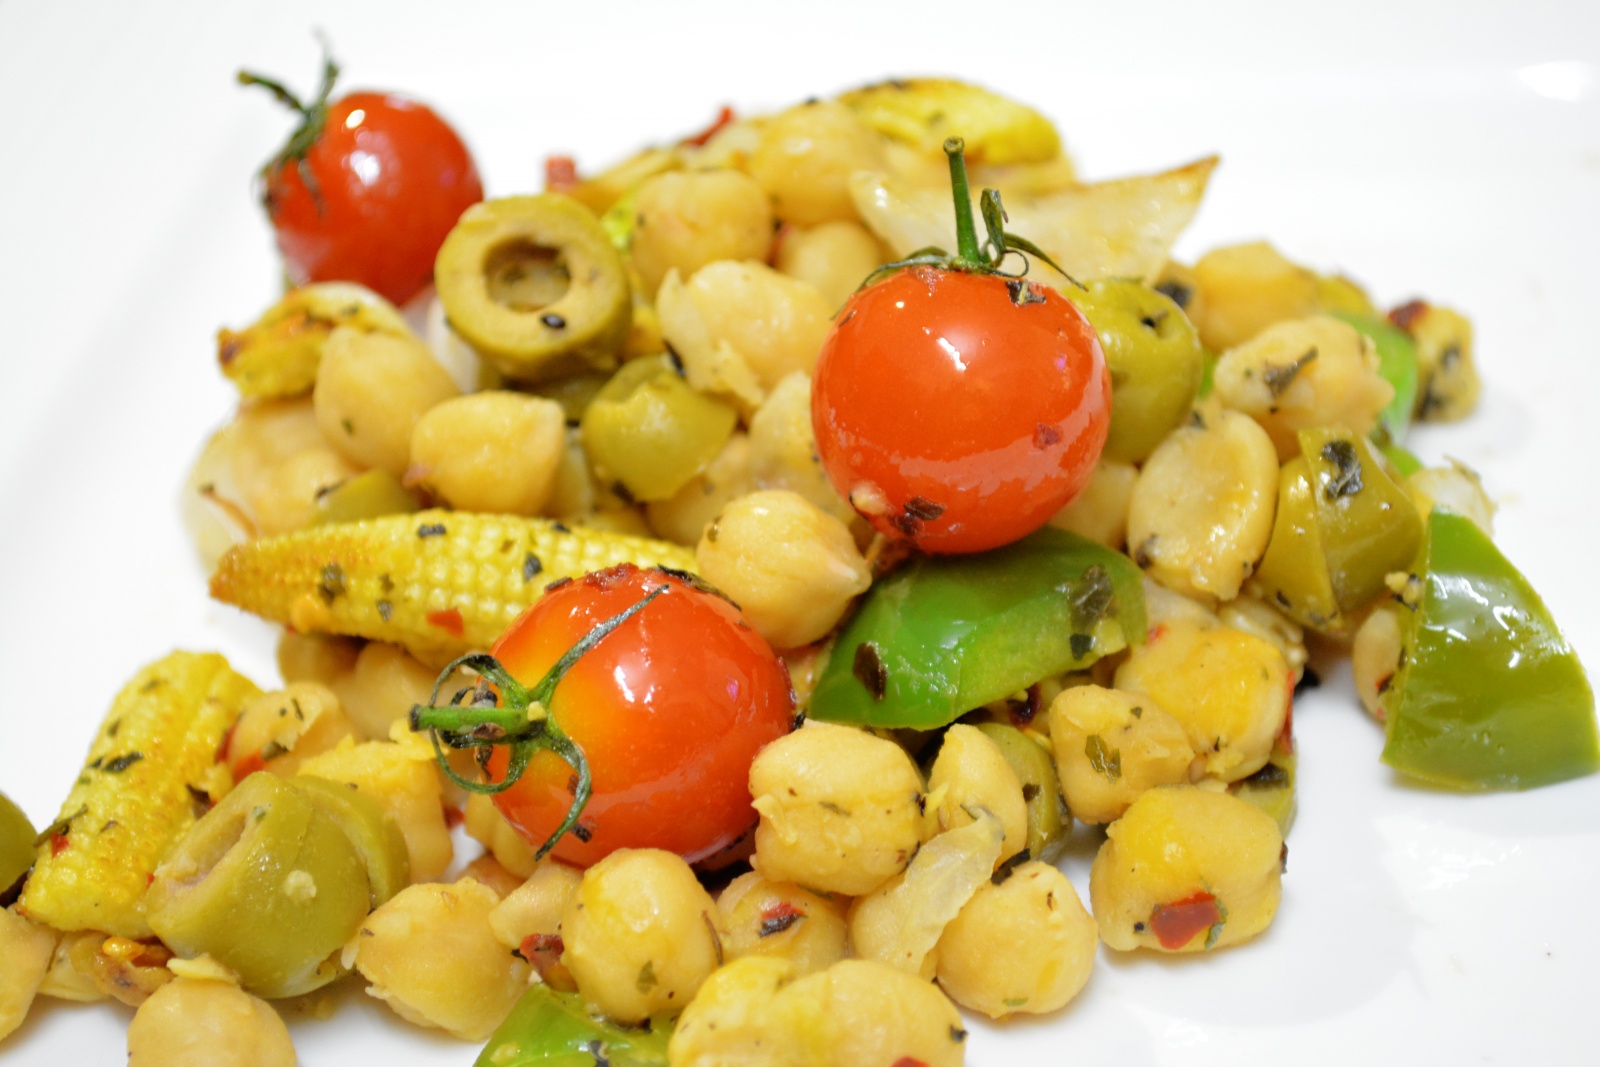 Chickpea Salad with Cherry Tomatoes,Olives and Capsicum Recipe